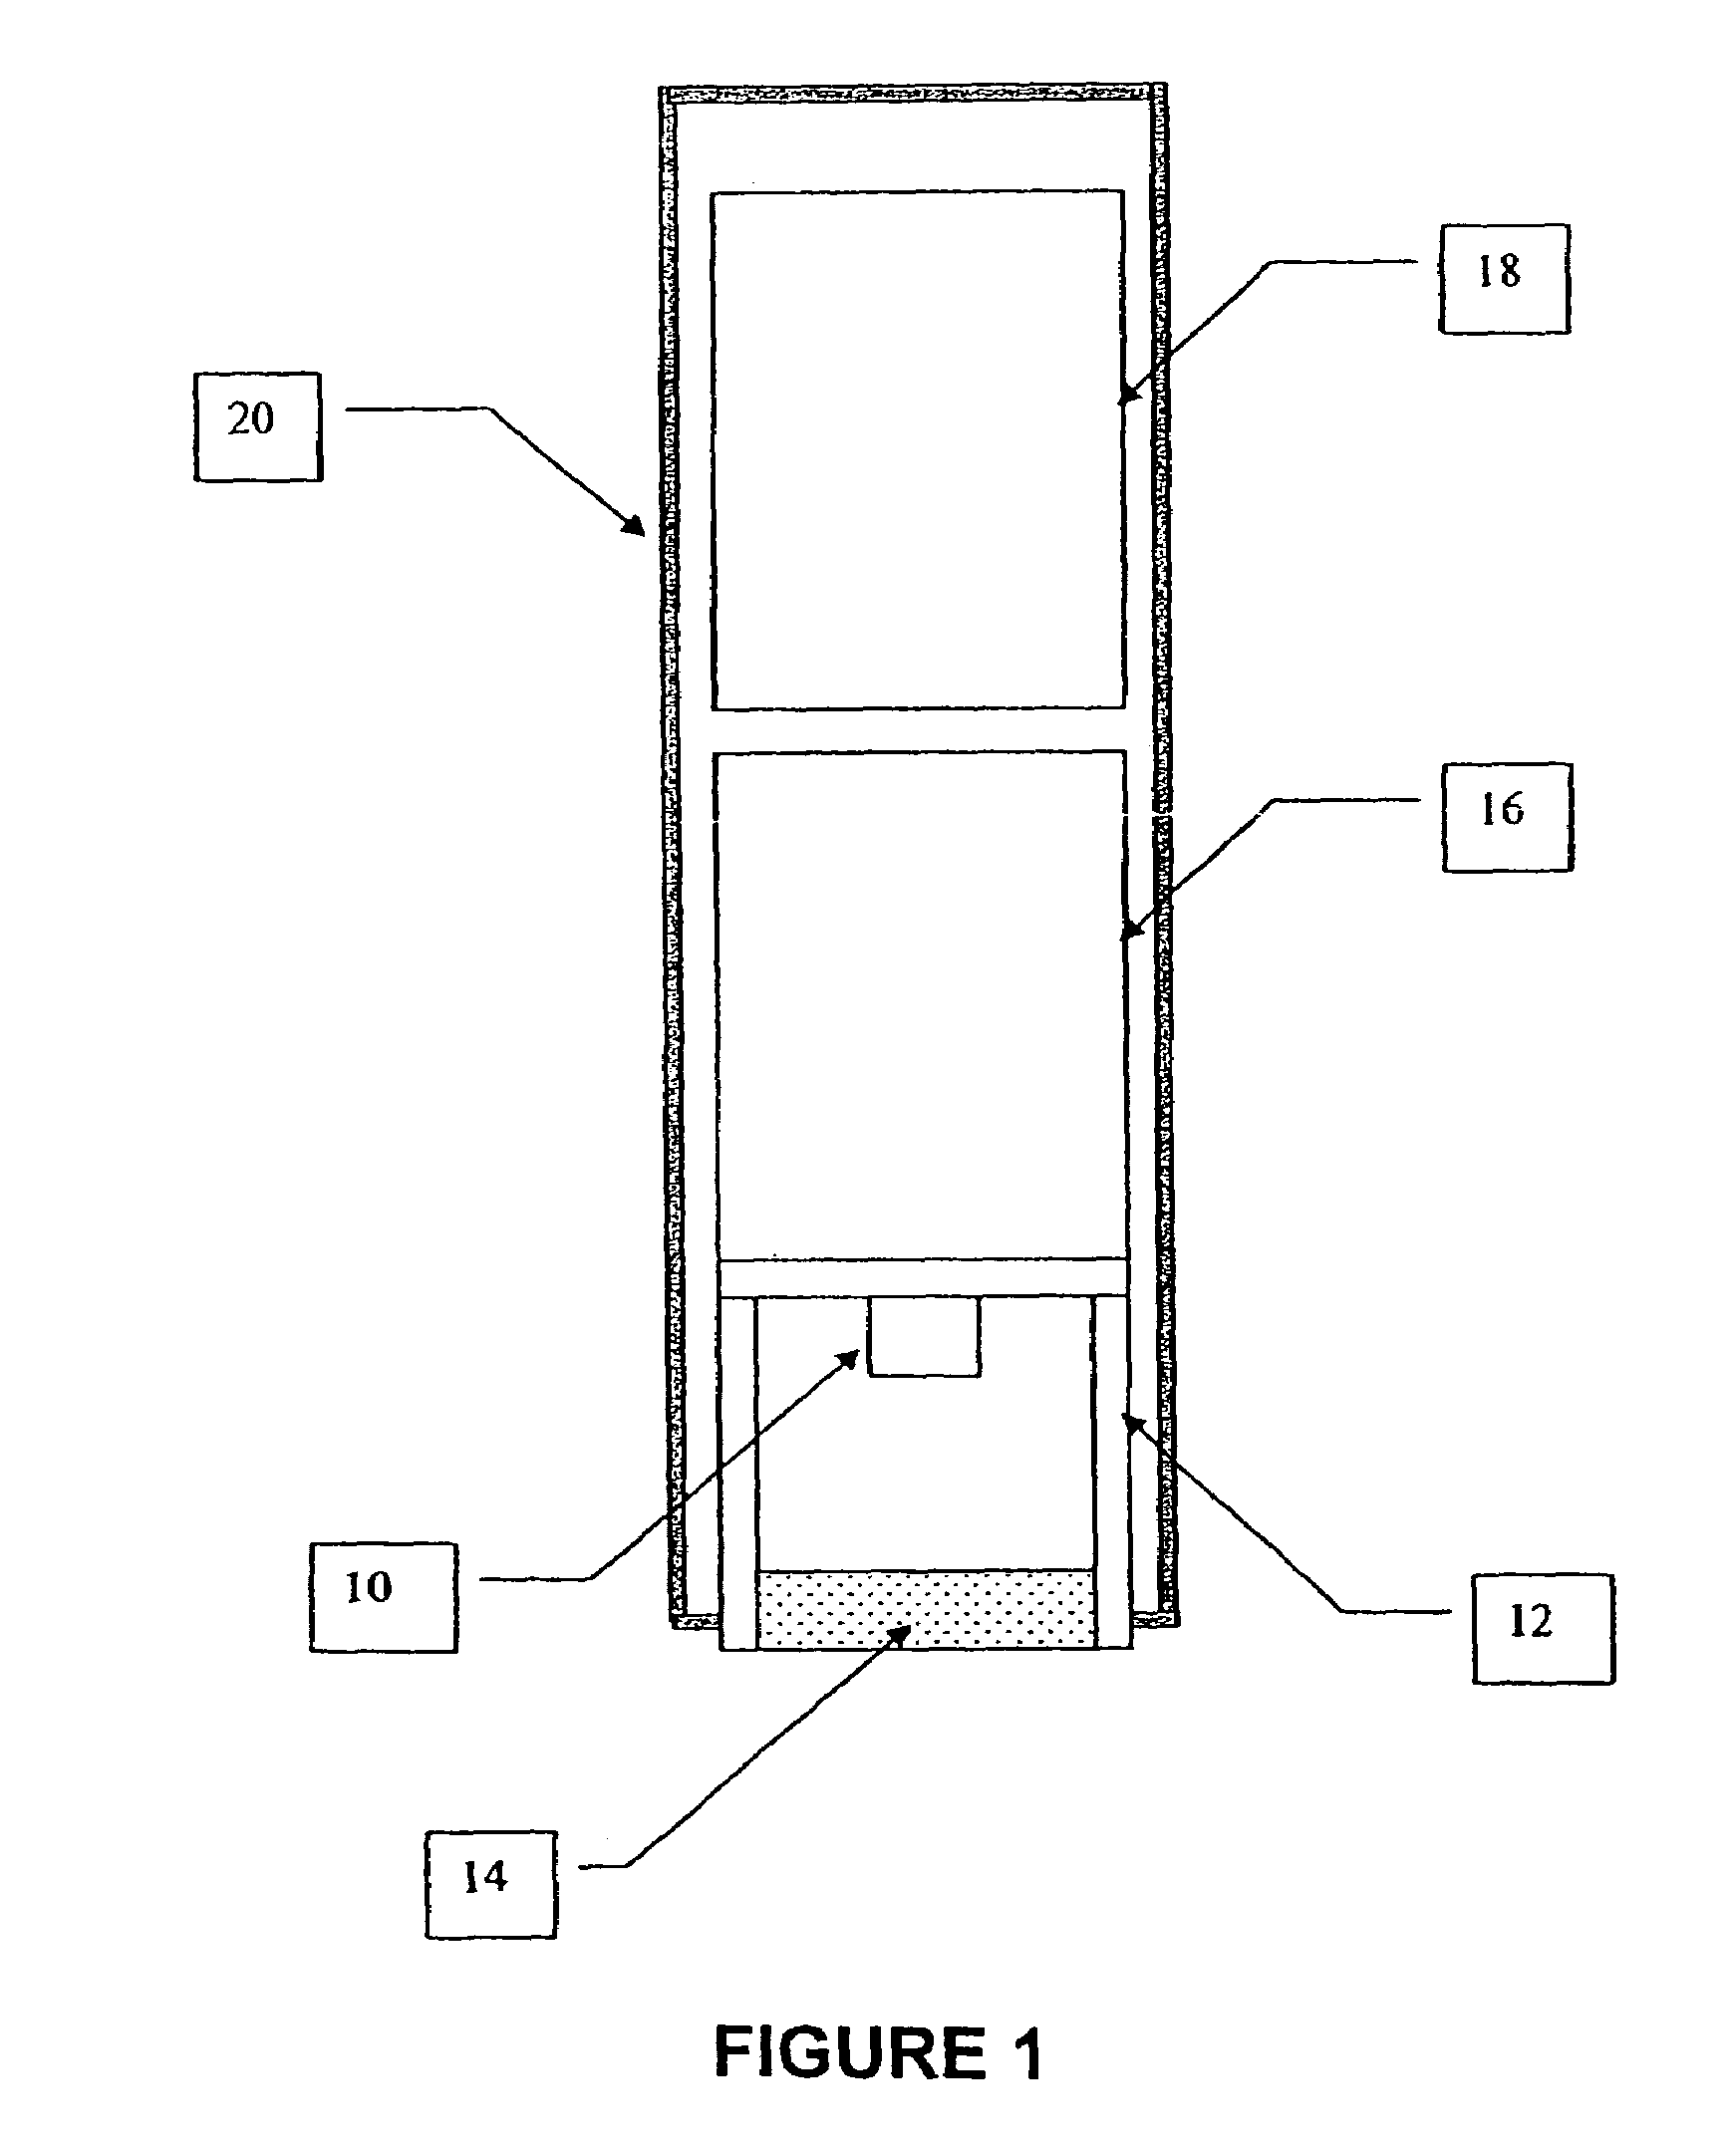 Self-contained, diode-laser-based dermatologic treatment apparatus